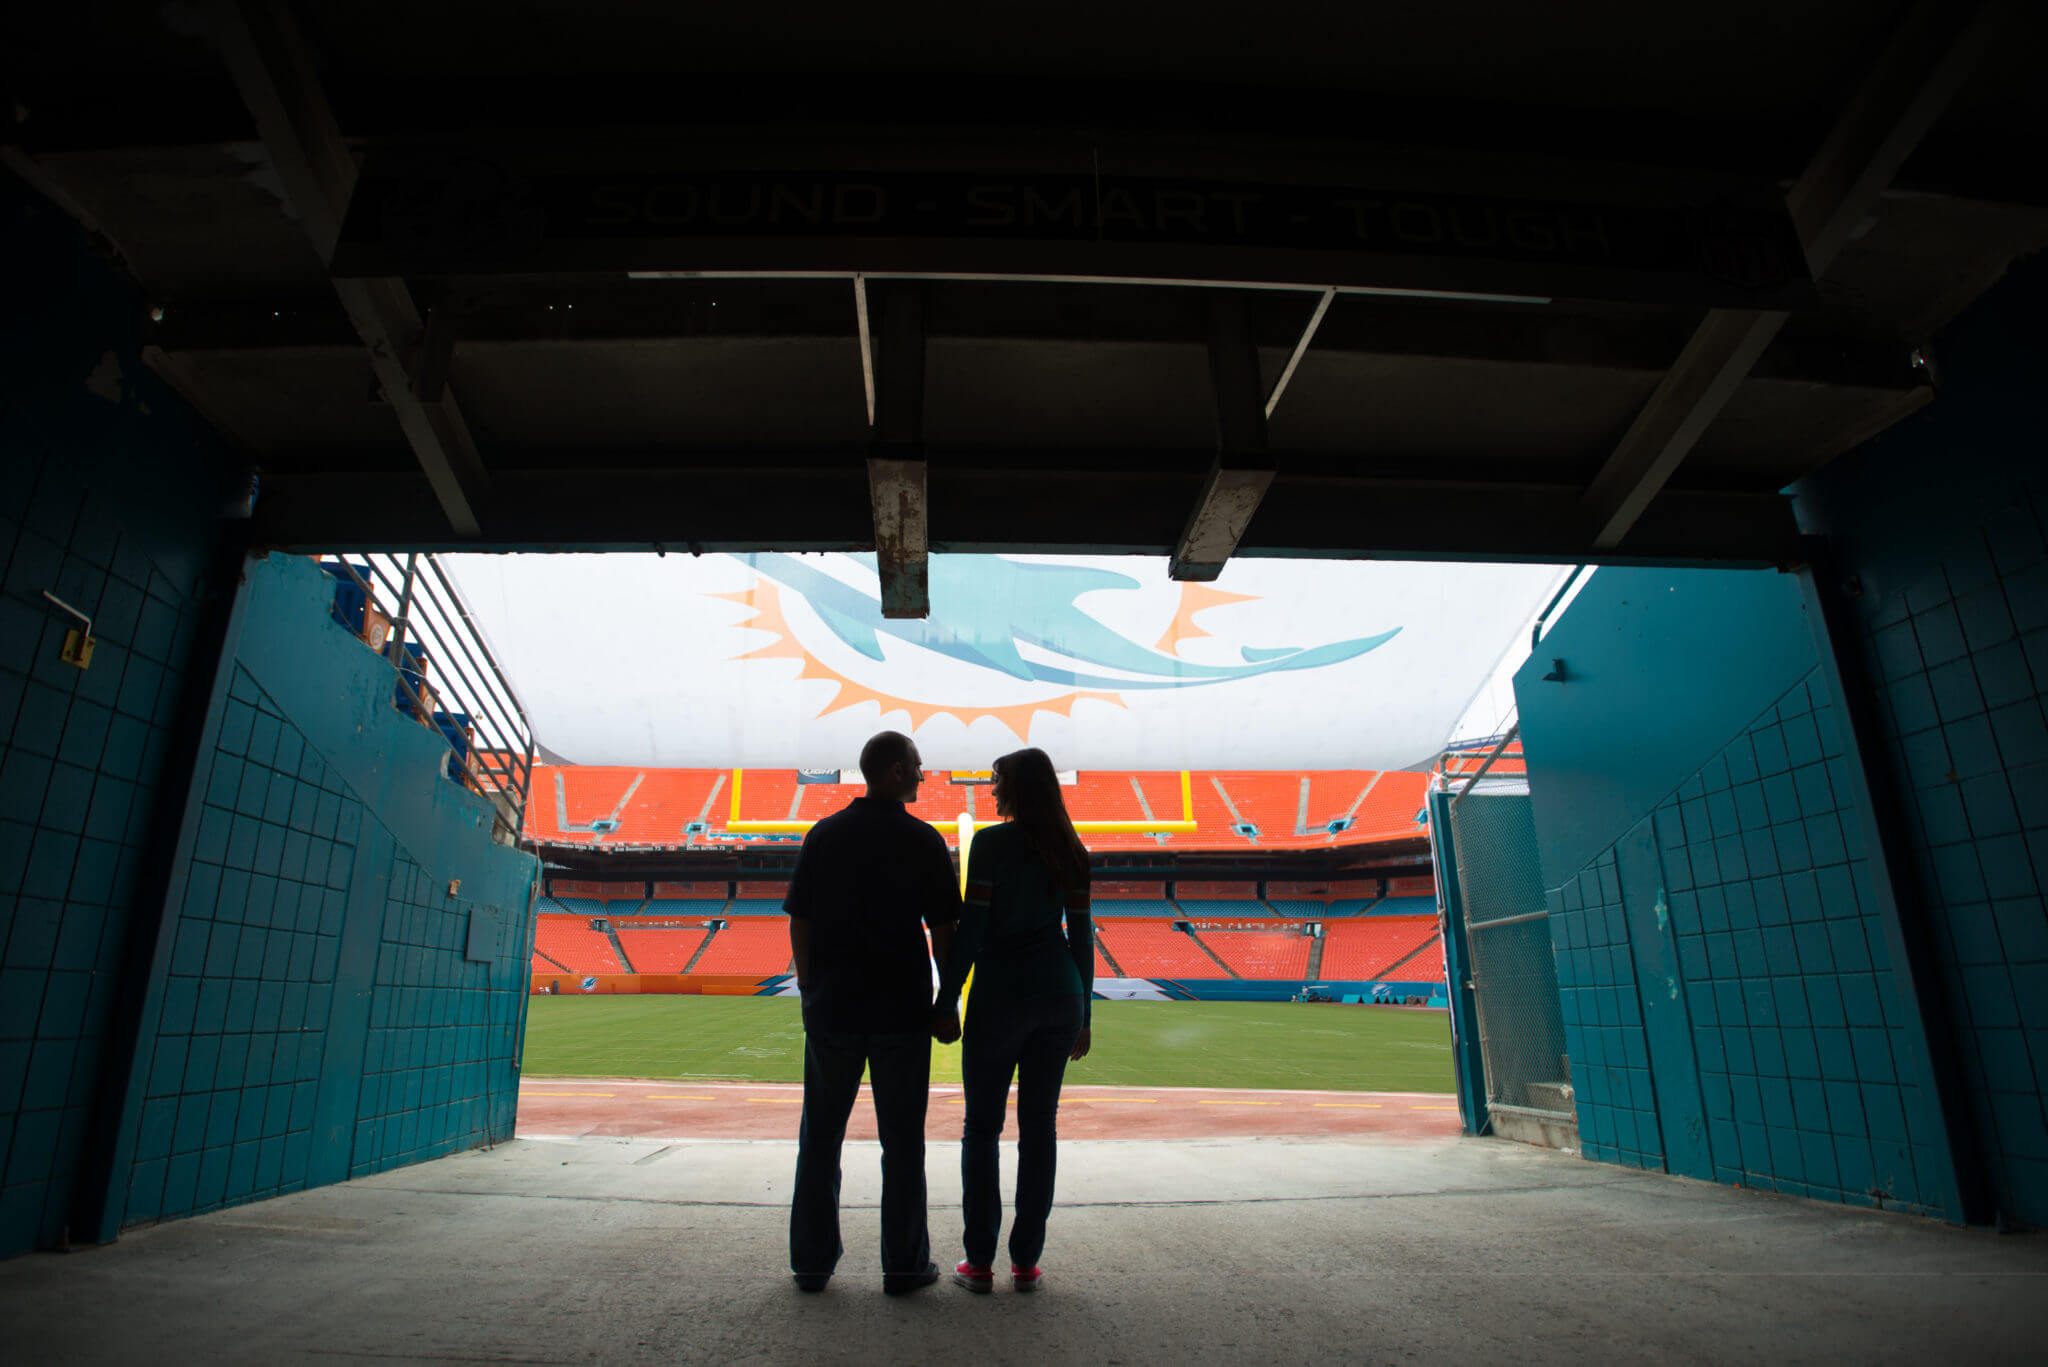 miami dolphins engagement shoot